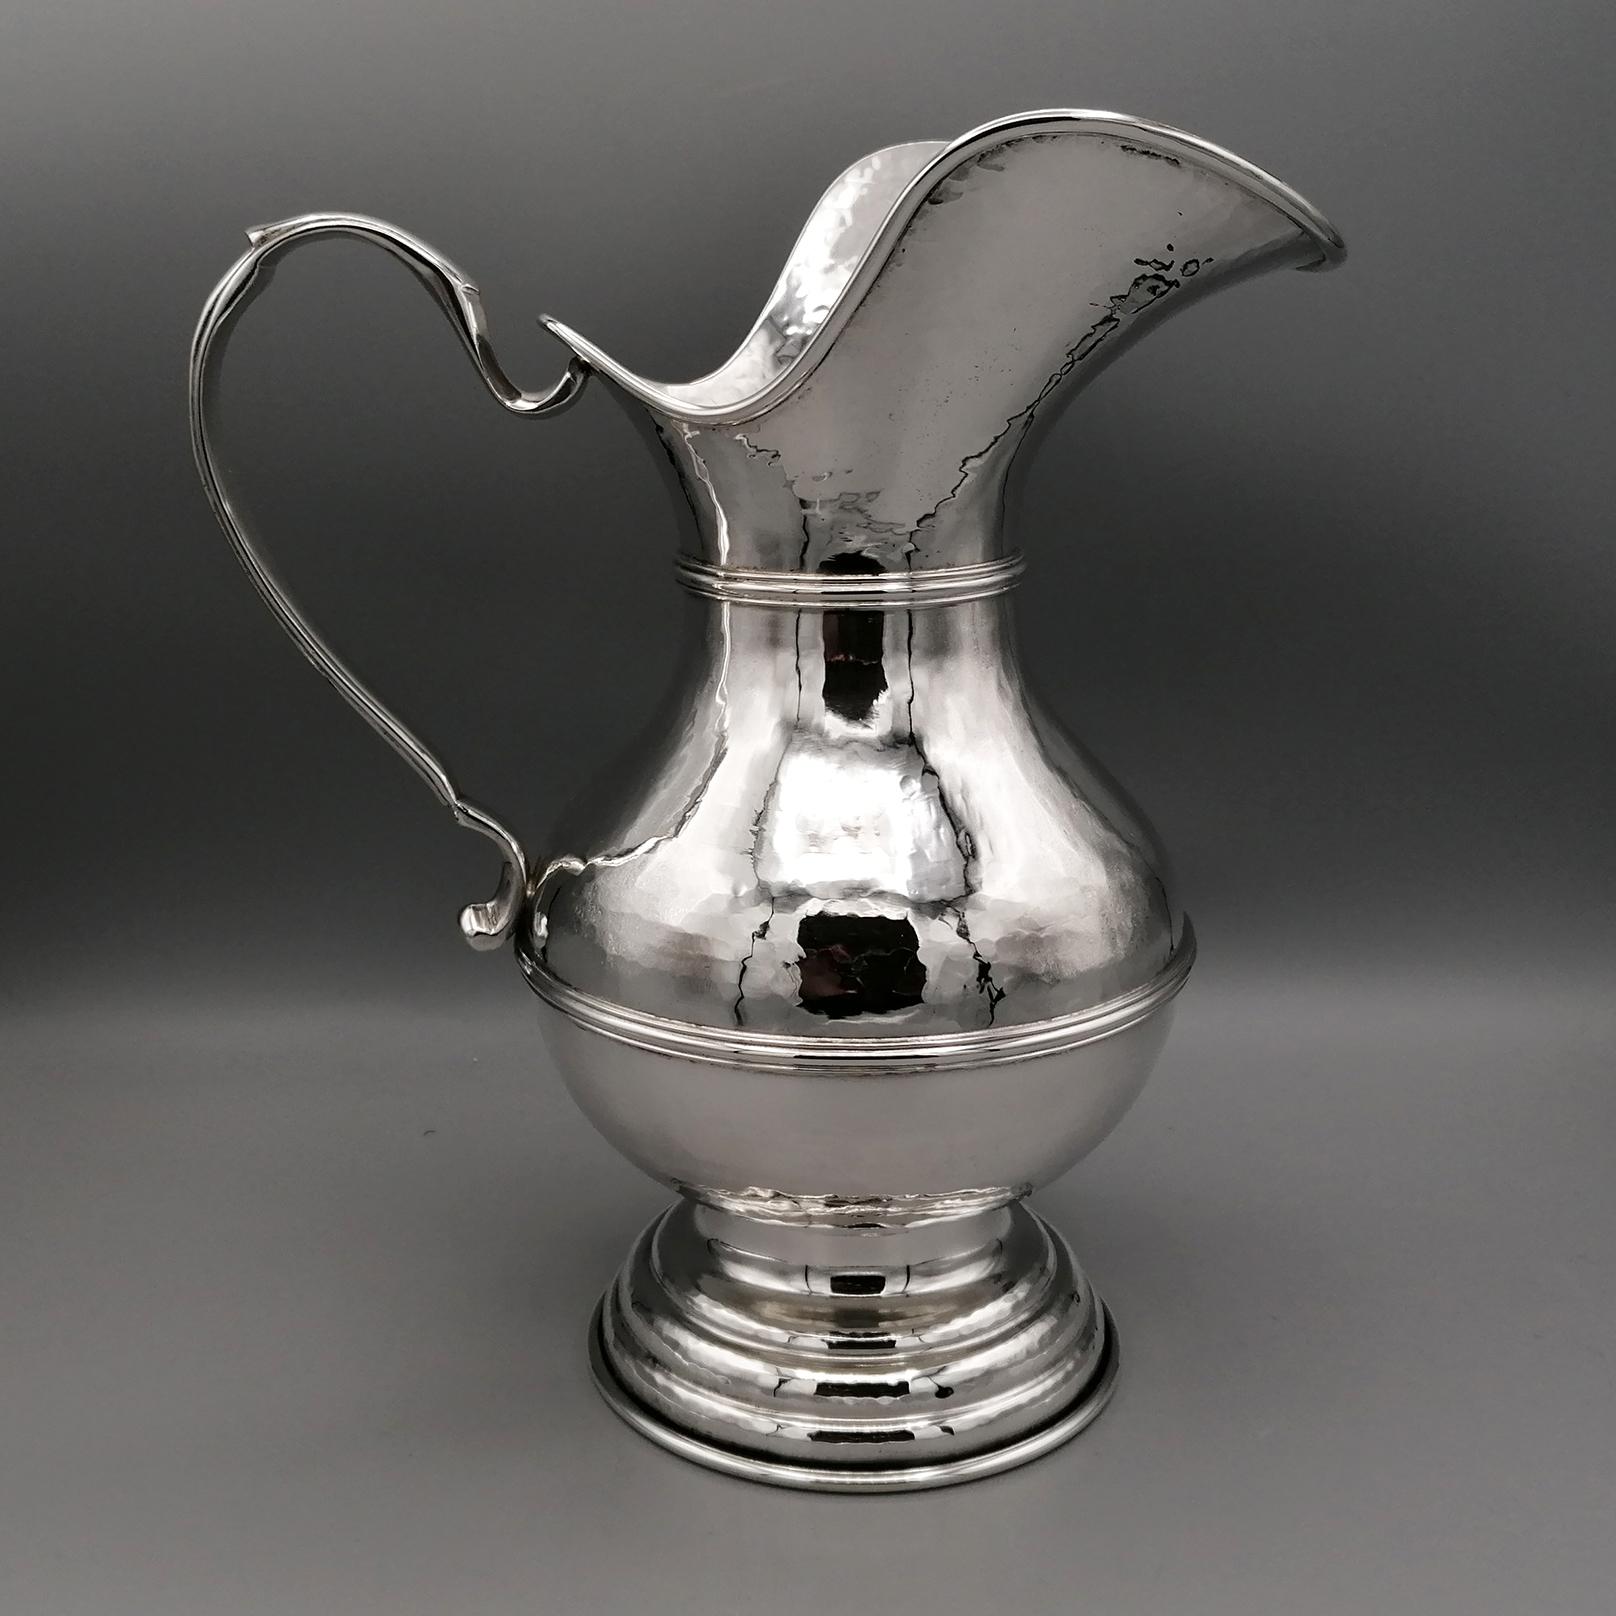 Hammered jug in 800 solid silver.
The pitcher, or pouring vessel, was hand made and subsequently hammered.
An important round base with a stepped design guarantees its stability.
The handle was made with the fusion technique and subsequently